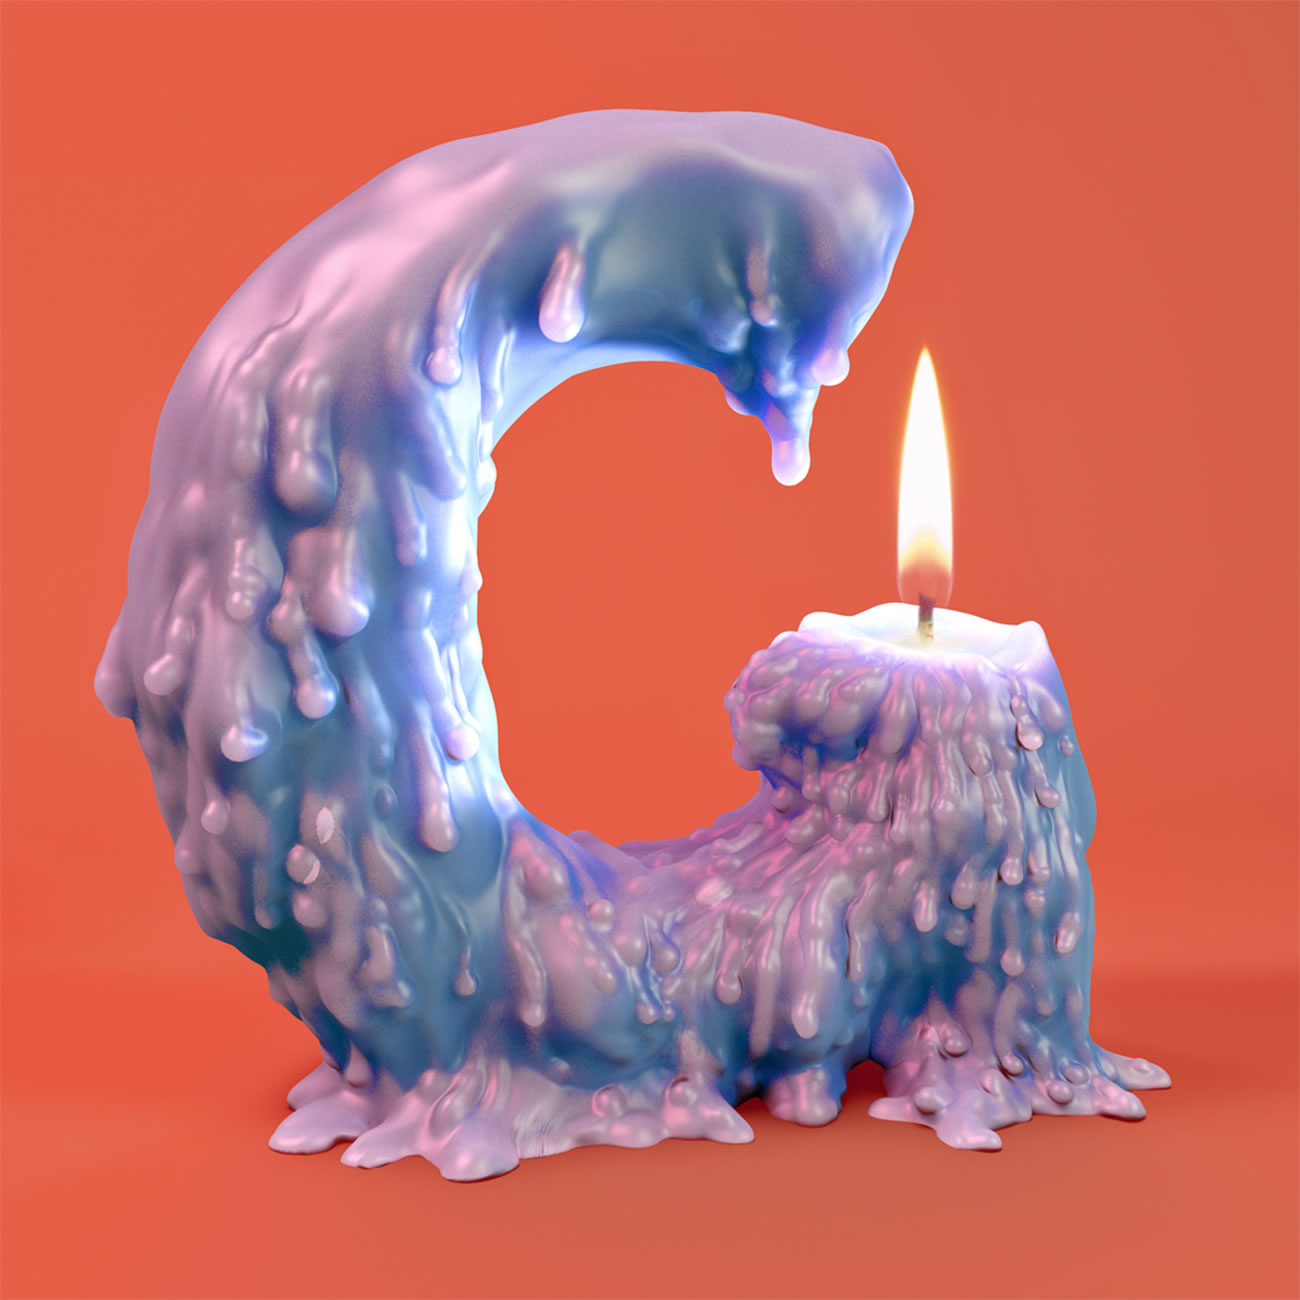 letter g as a candle by foreal